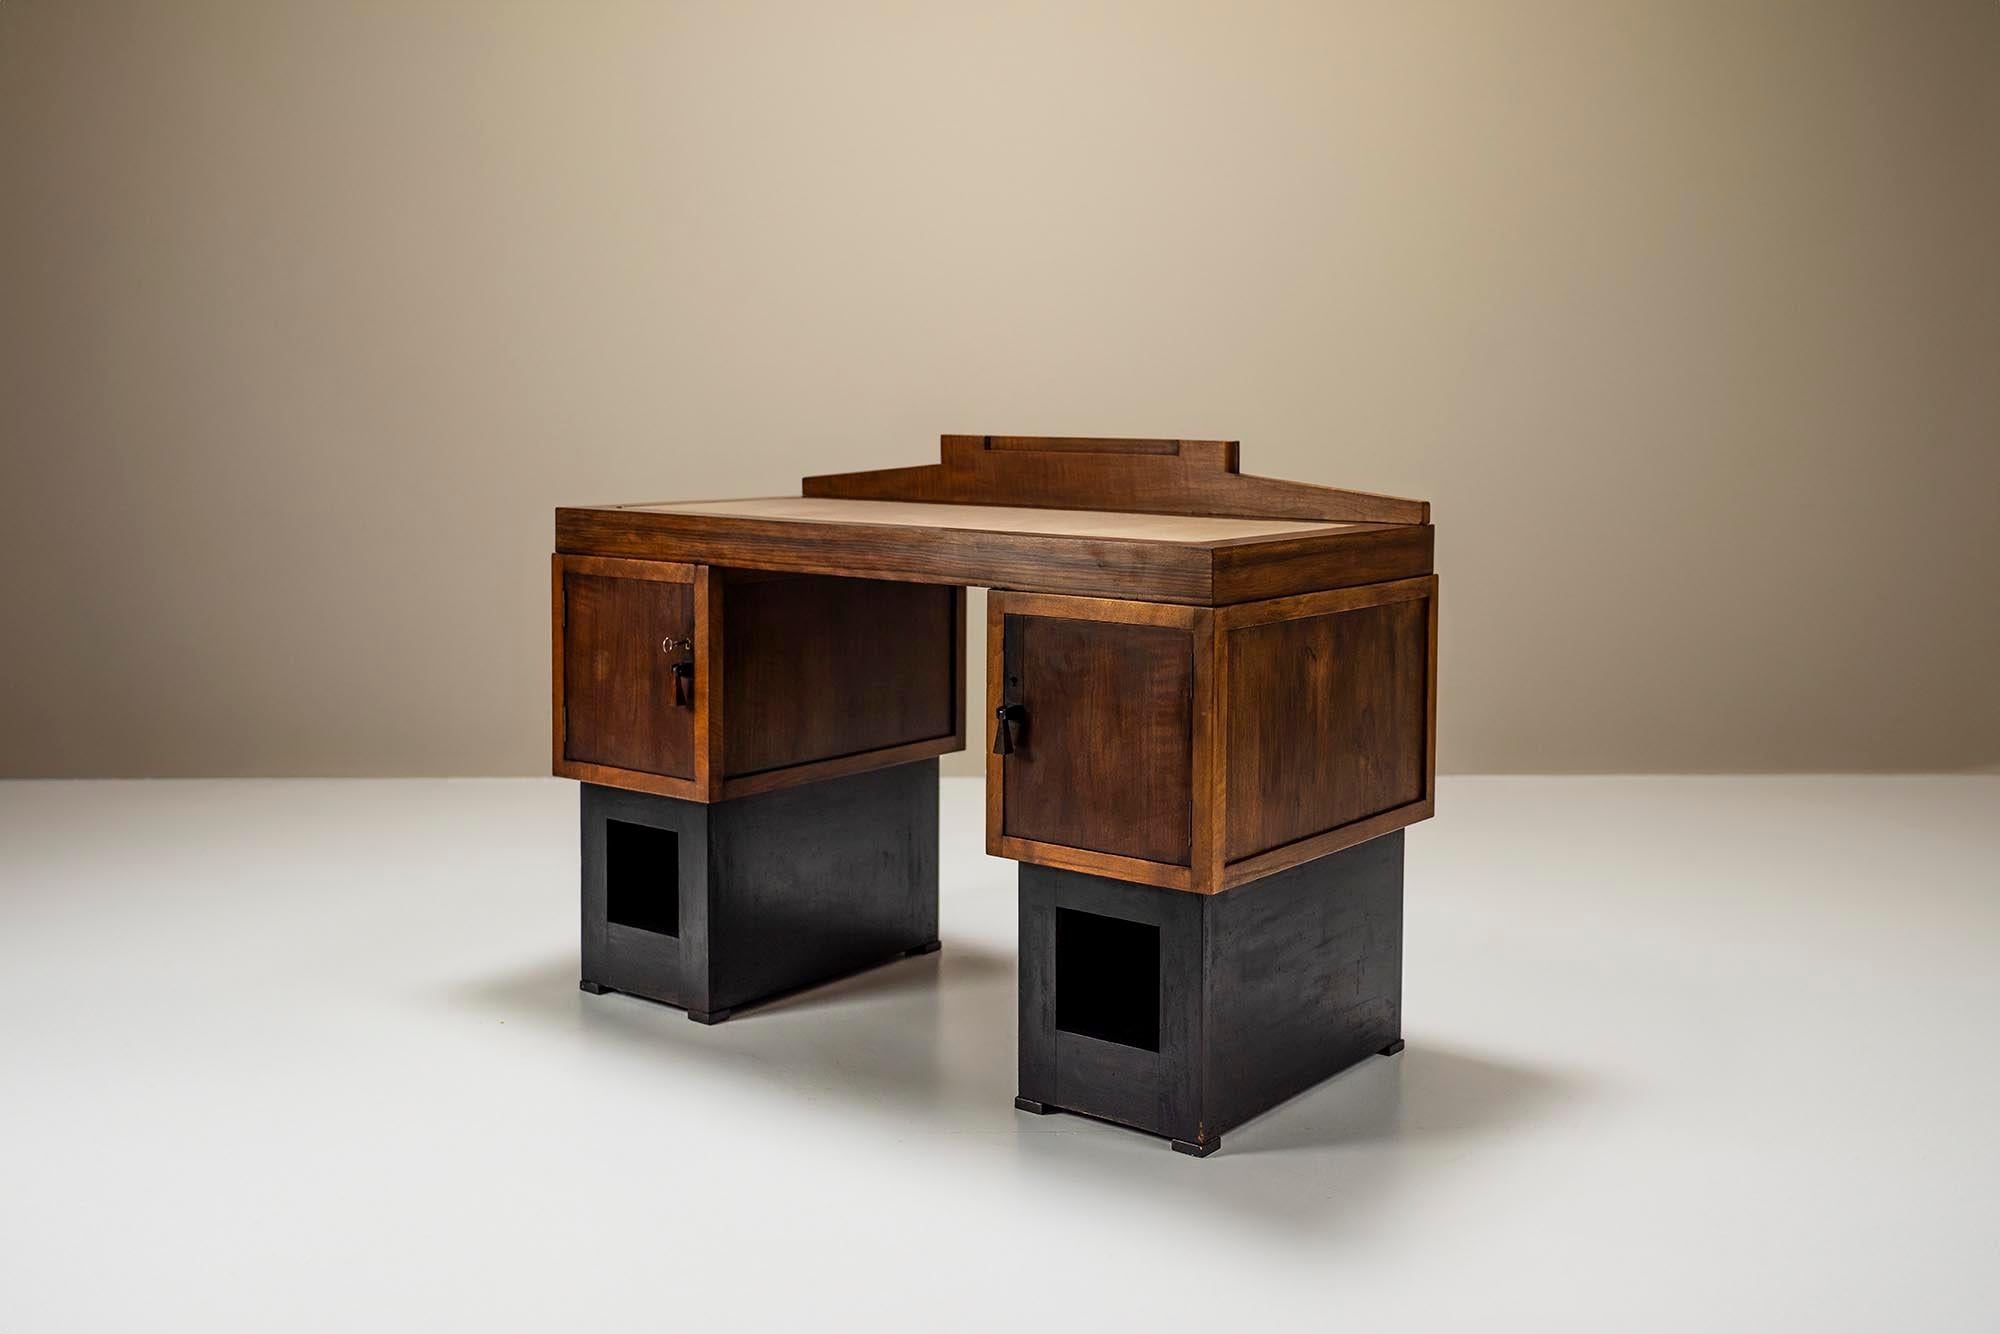 Art Deco Amsterdam School Cubist Desk by Anton Hamaker for 't Woonhuys, 1930s For Sale